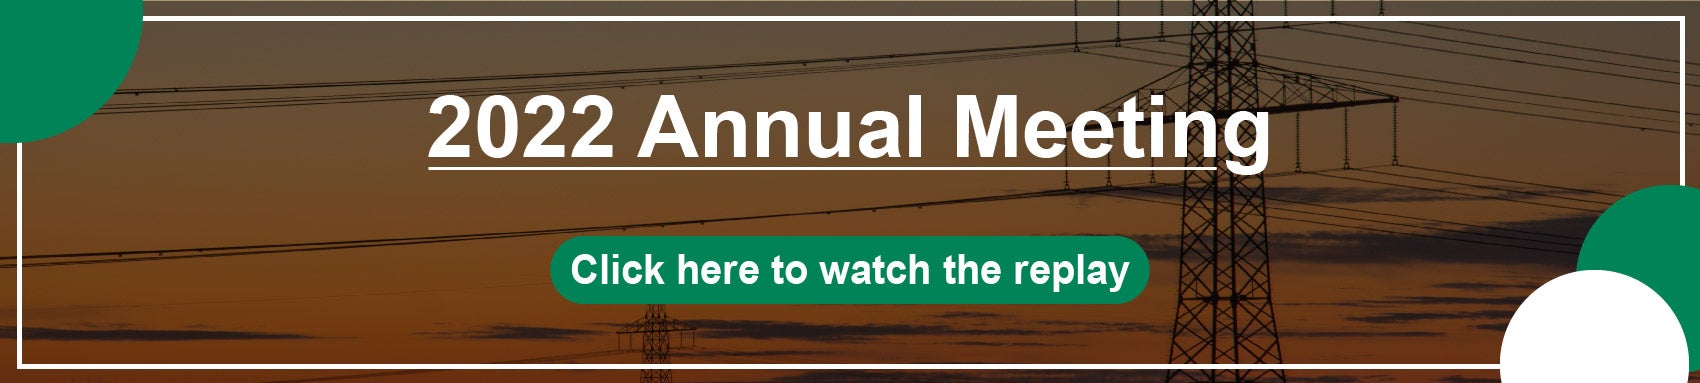 Click here to watch a replay of the 2022 Annual Meeting